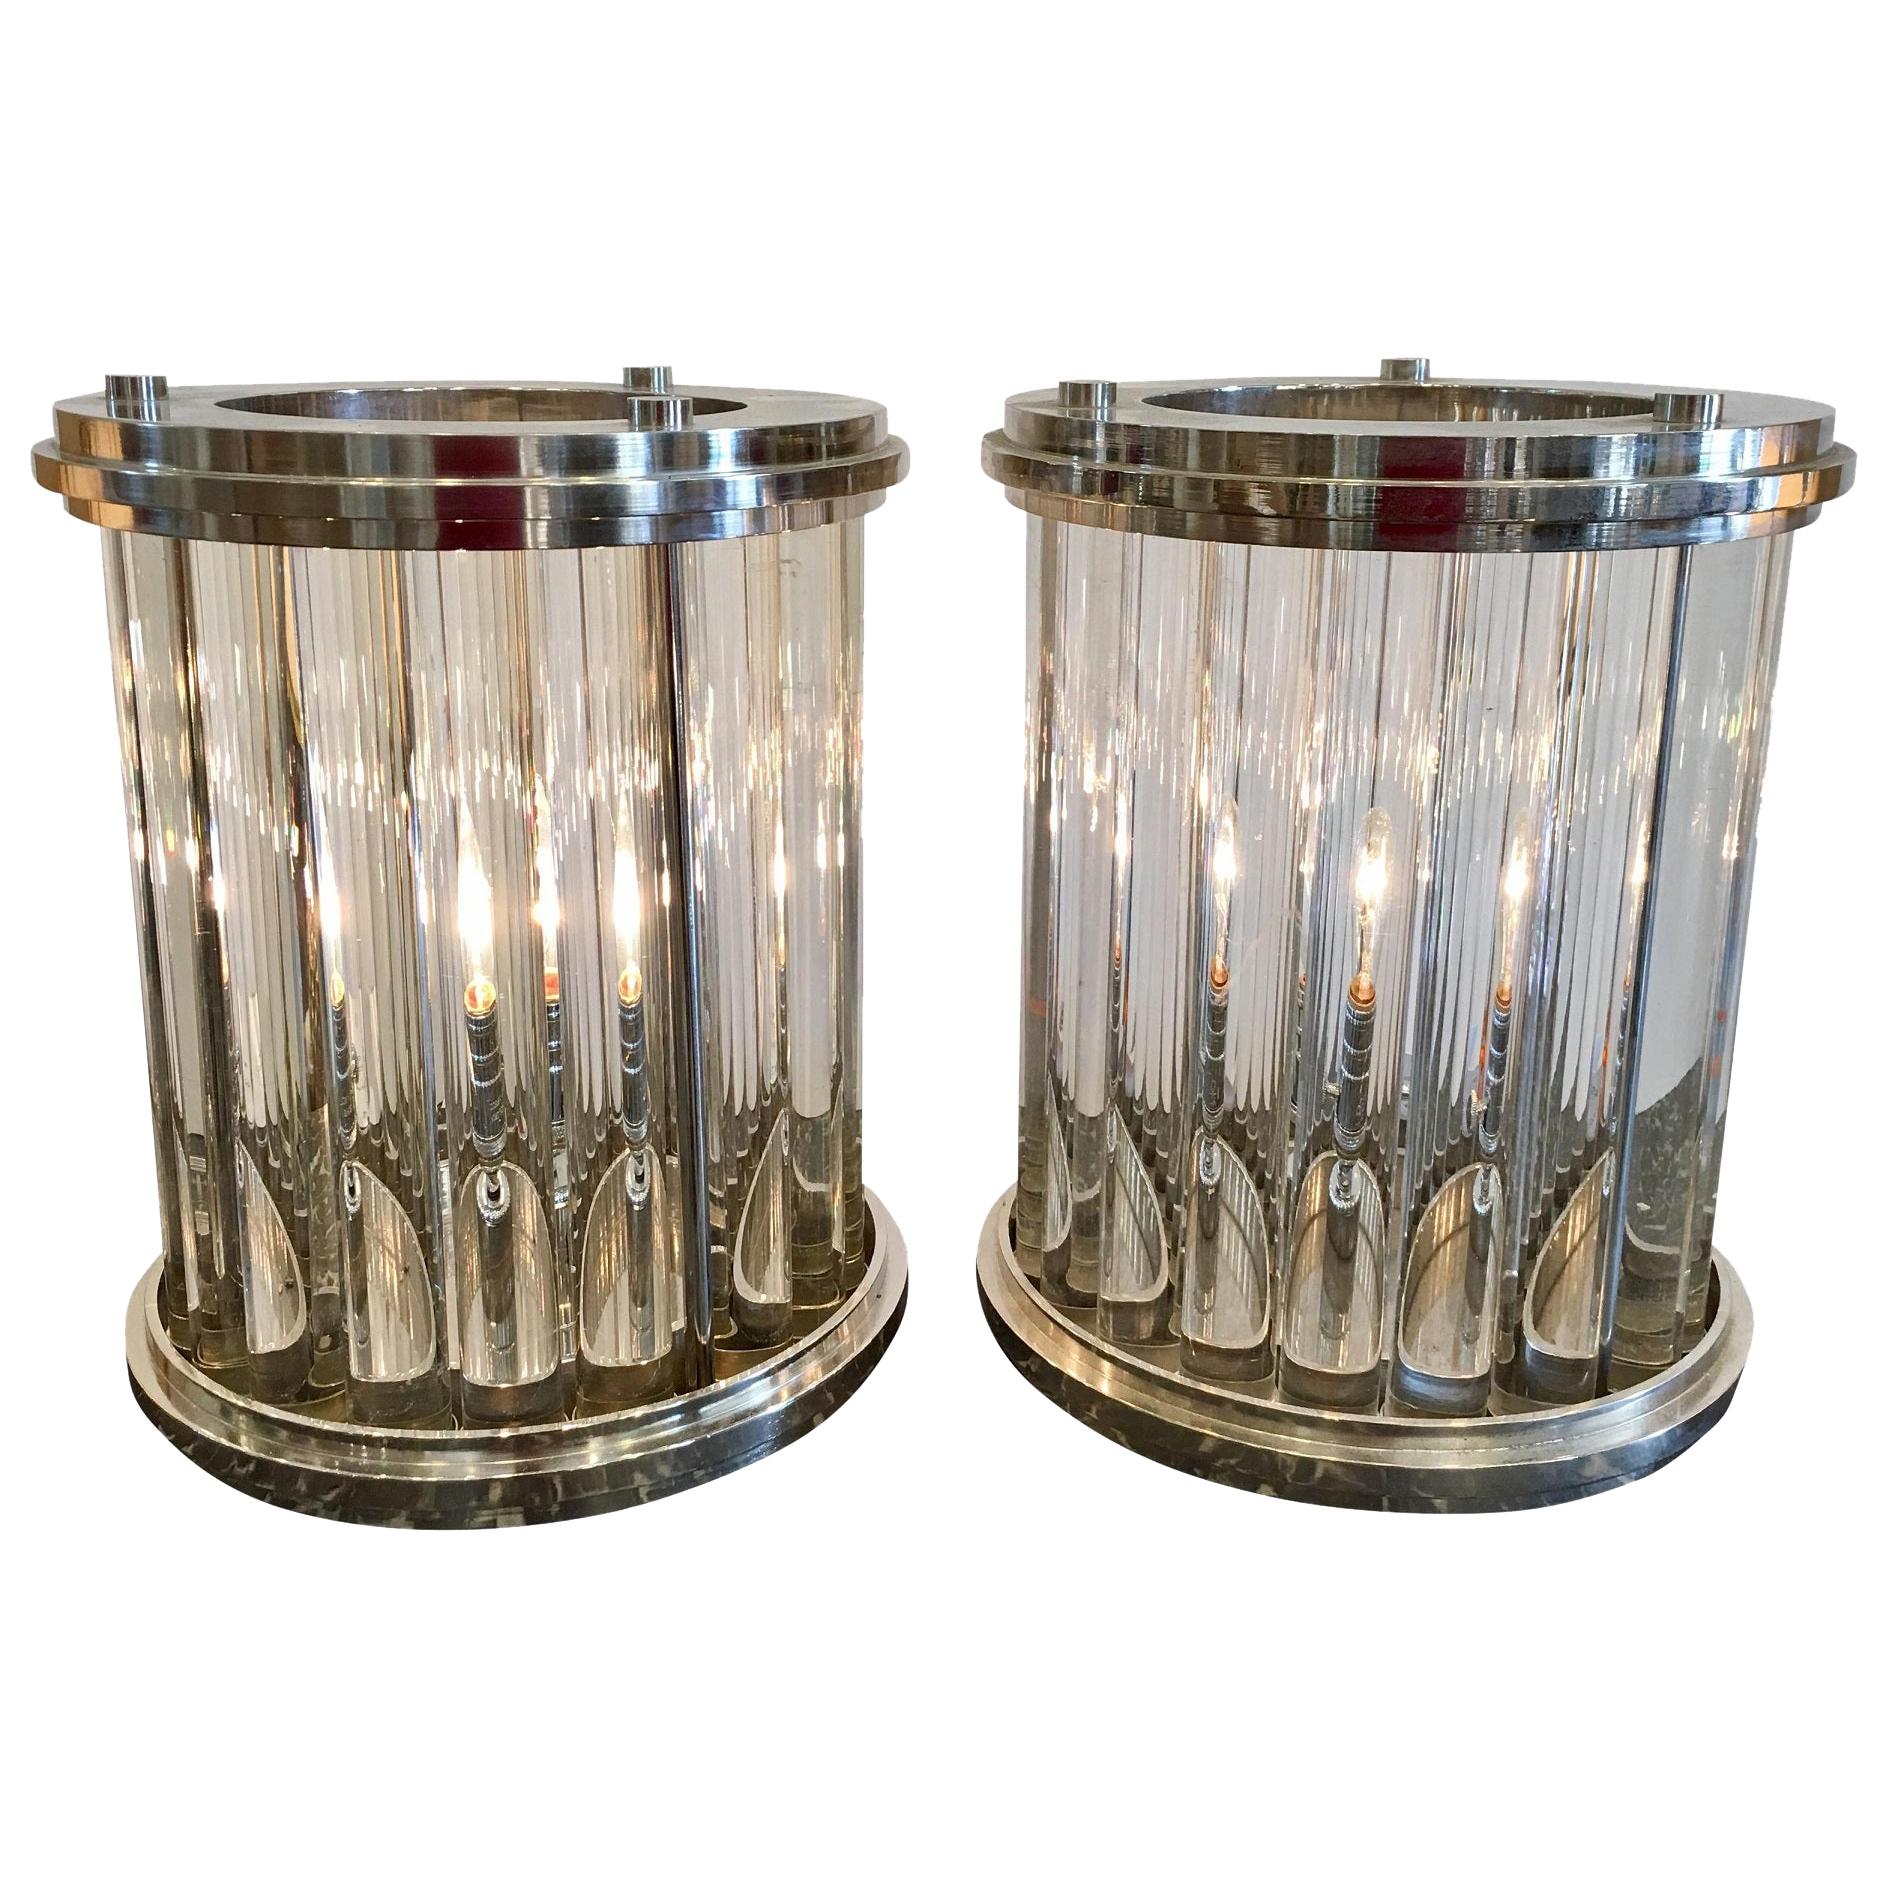 Pair of Art Deco Style Nickel-Plated Glass Rod Modernist Lamps by Randy Esada